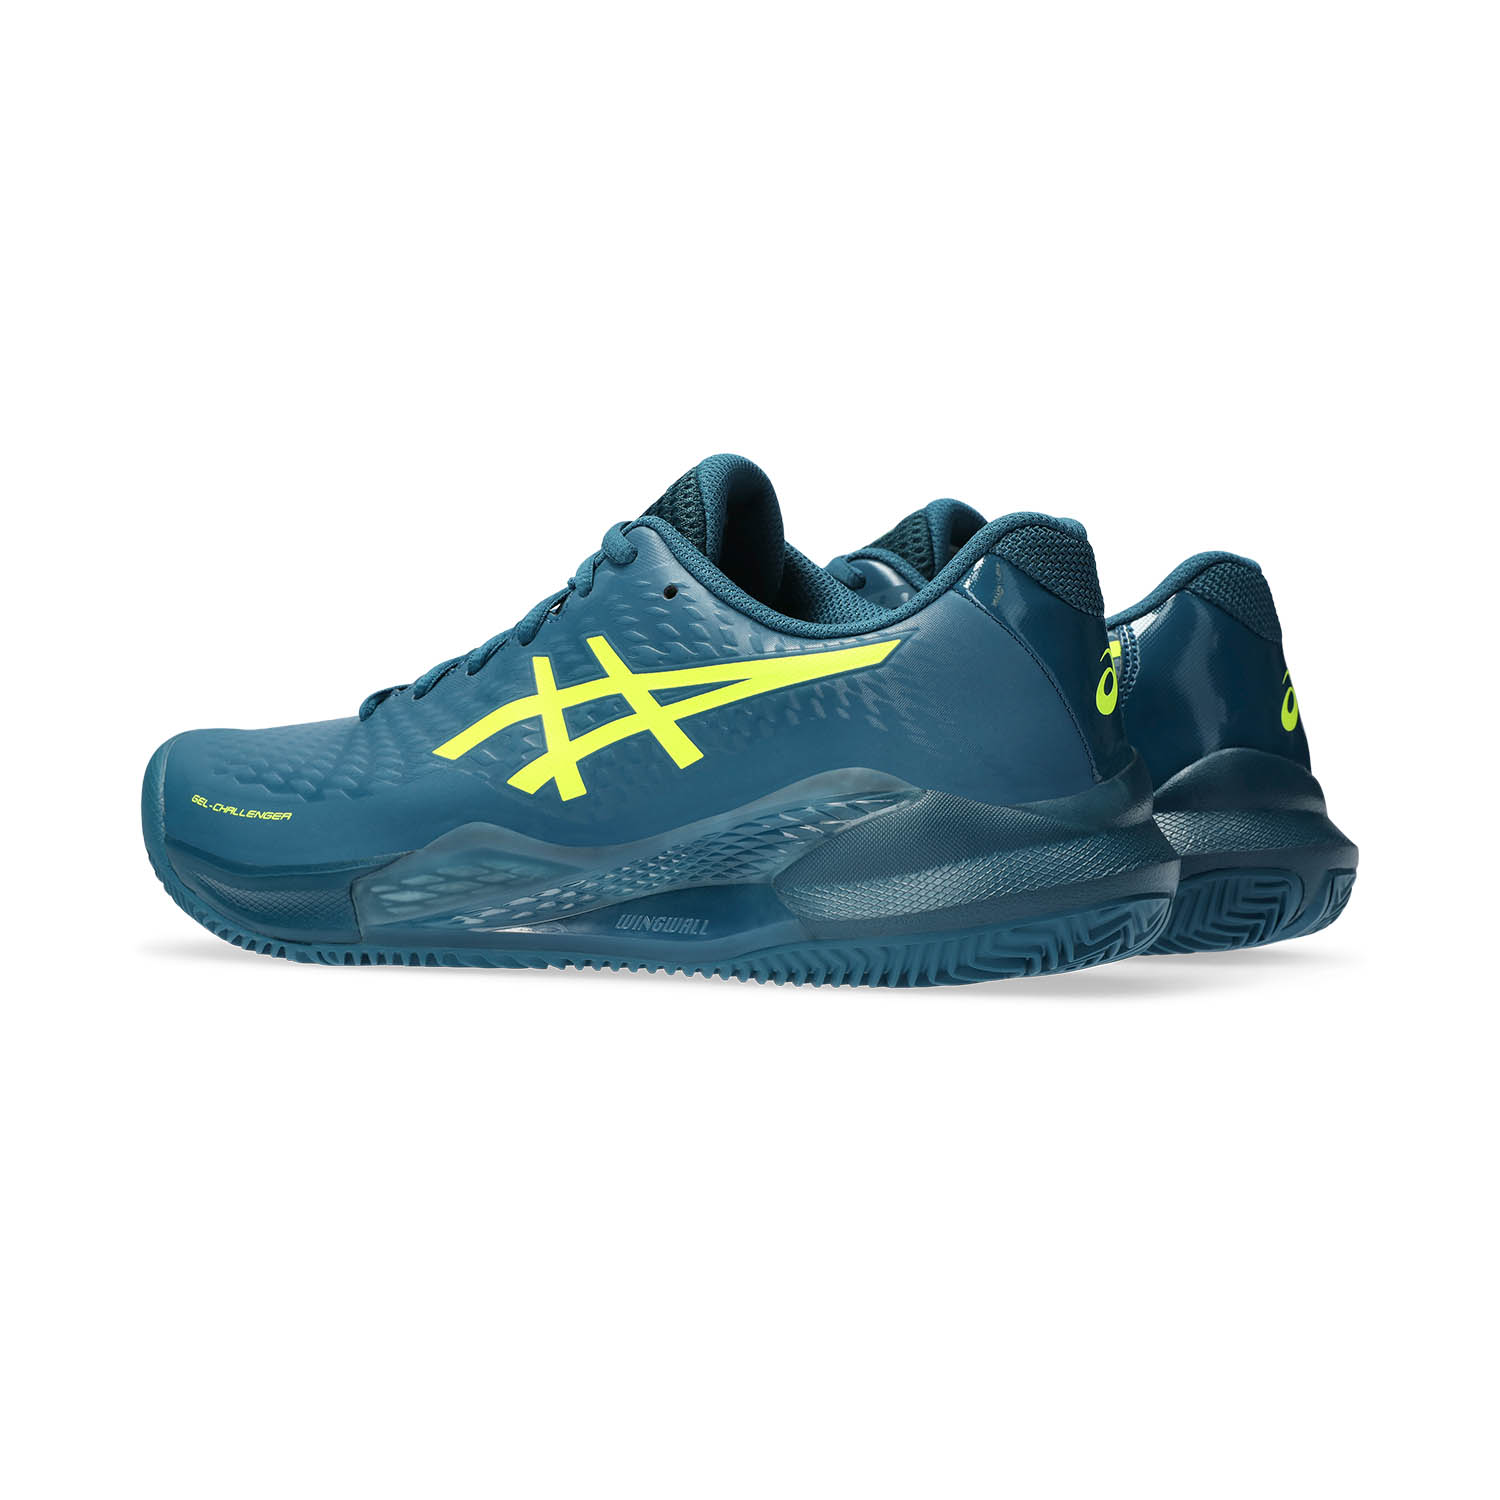 Asics Gel Challenger 14 Clay - Restful Teal/Safety Yellow